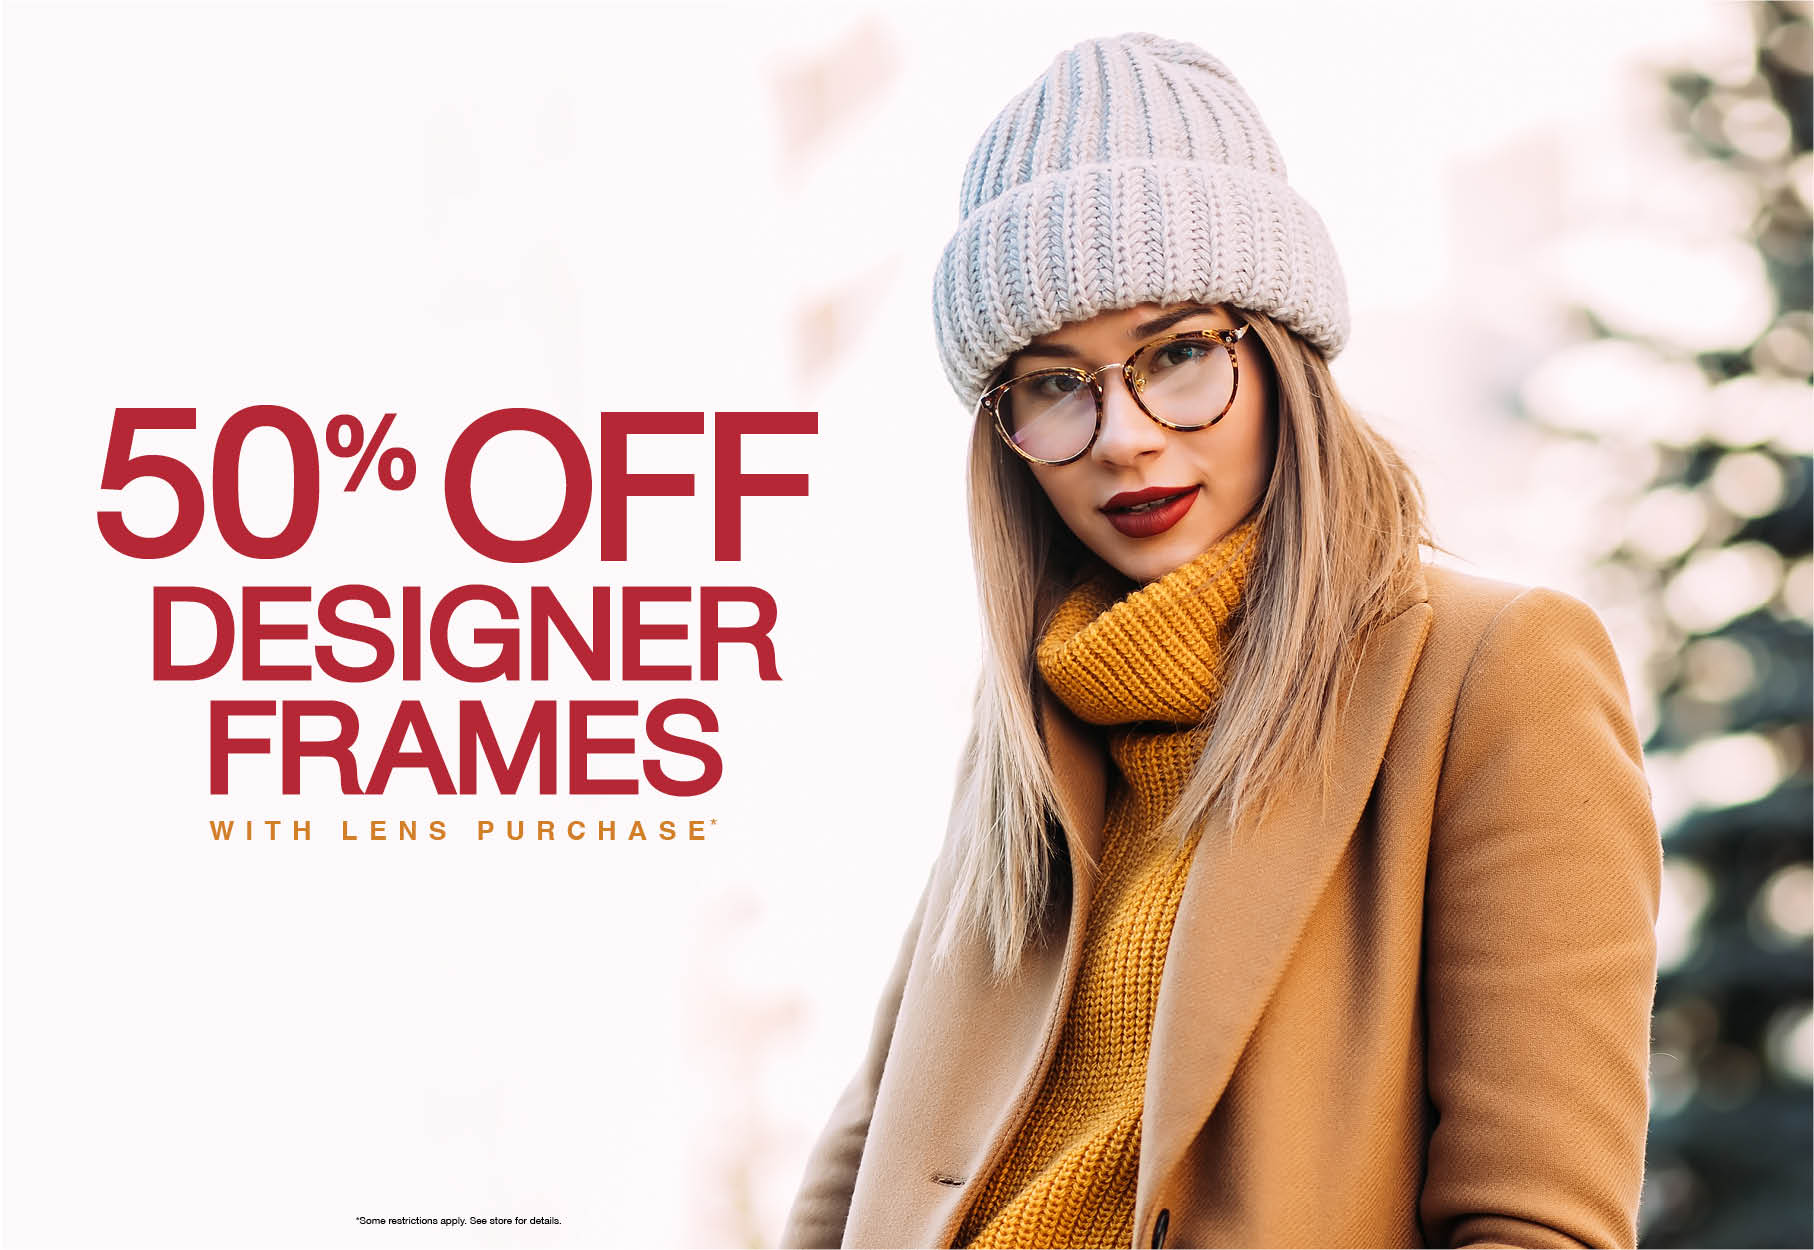 Text: 50% off designer frames with lens purchase* *Some restrictions apply. See store for details. Photo: Young woman wearing a sweater, hat, and eyeglasses